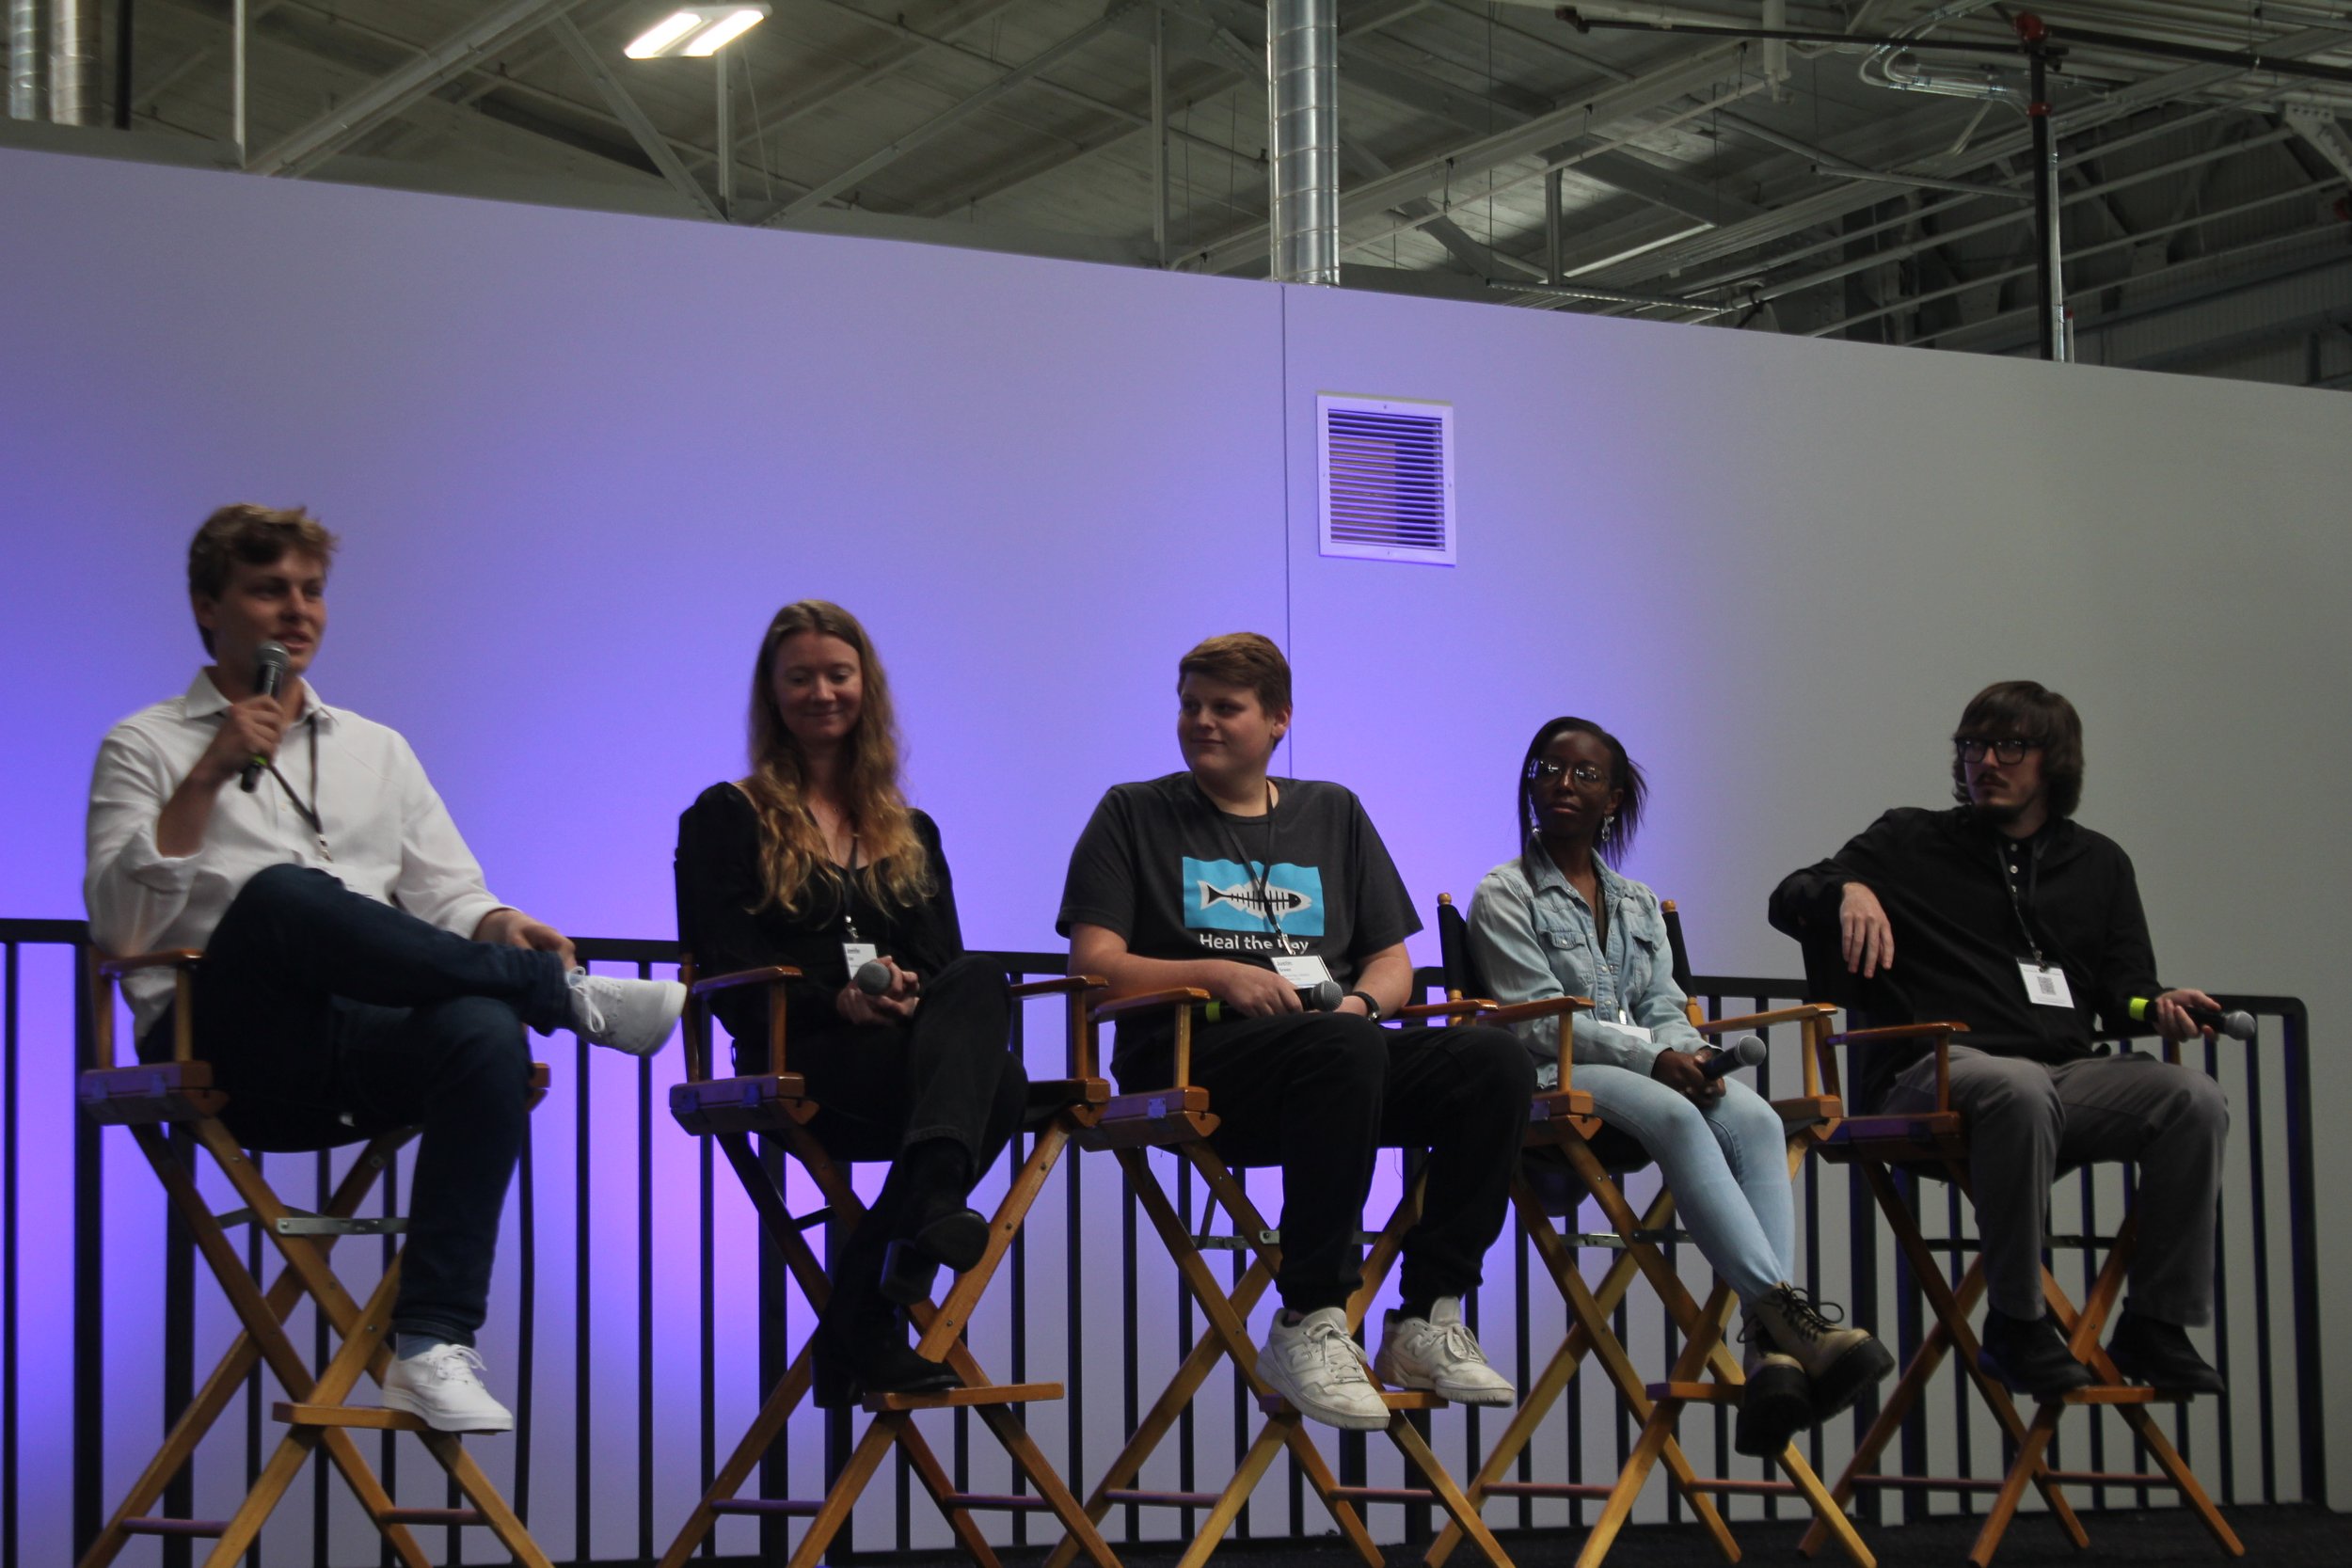  Left to right; Max, student at SMC, Jennifer Cole, student at SMC, Justin, student at Santa Monica Highschool, Ariana, student at SMC, and John, student at SMC forming the student panel. Max answers a question from SMC Life Science Professor Laura R